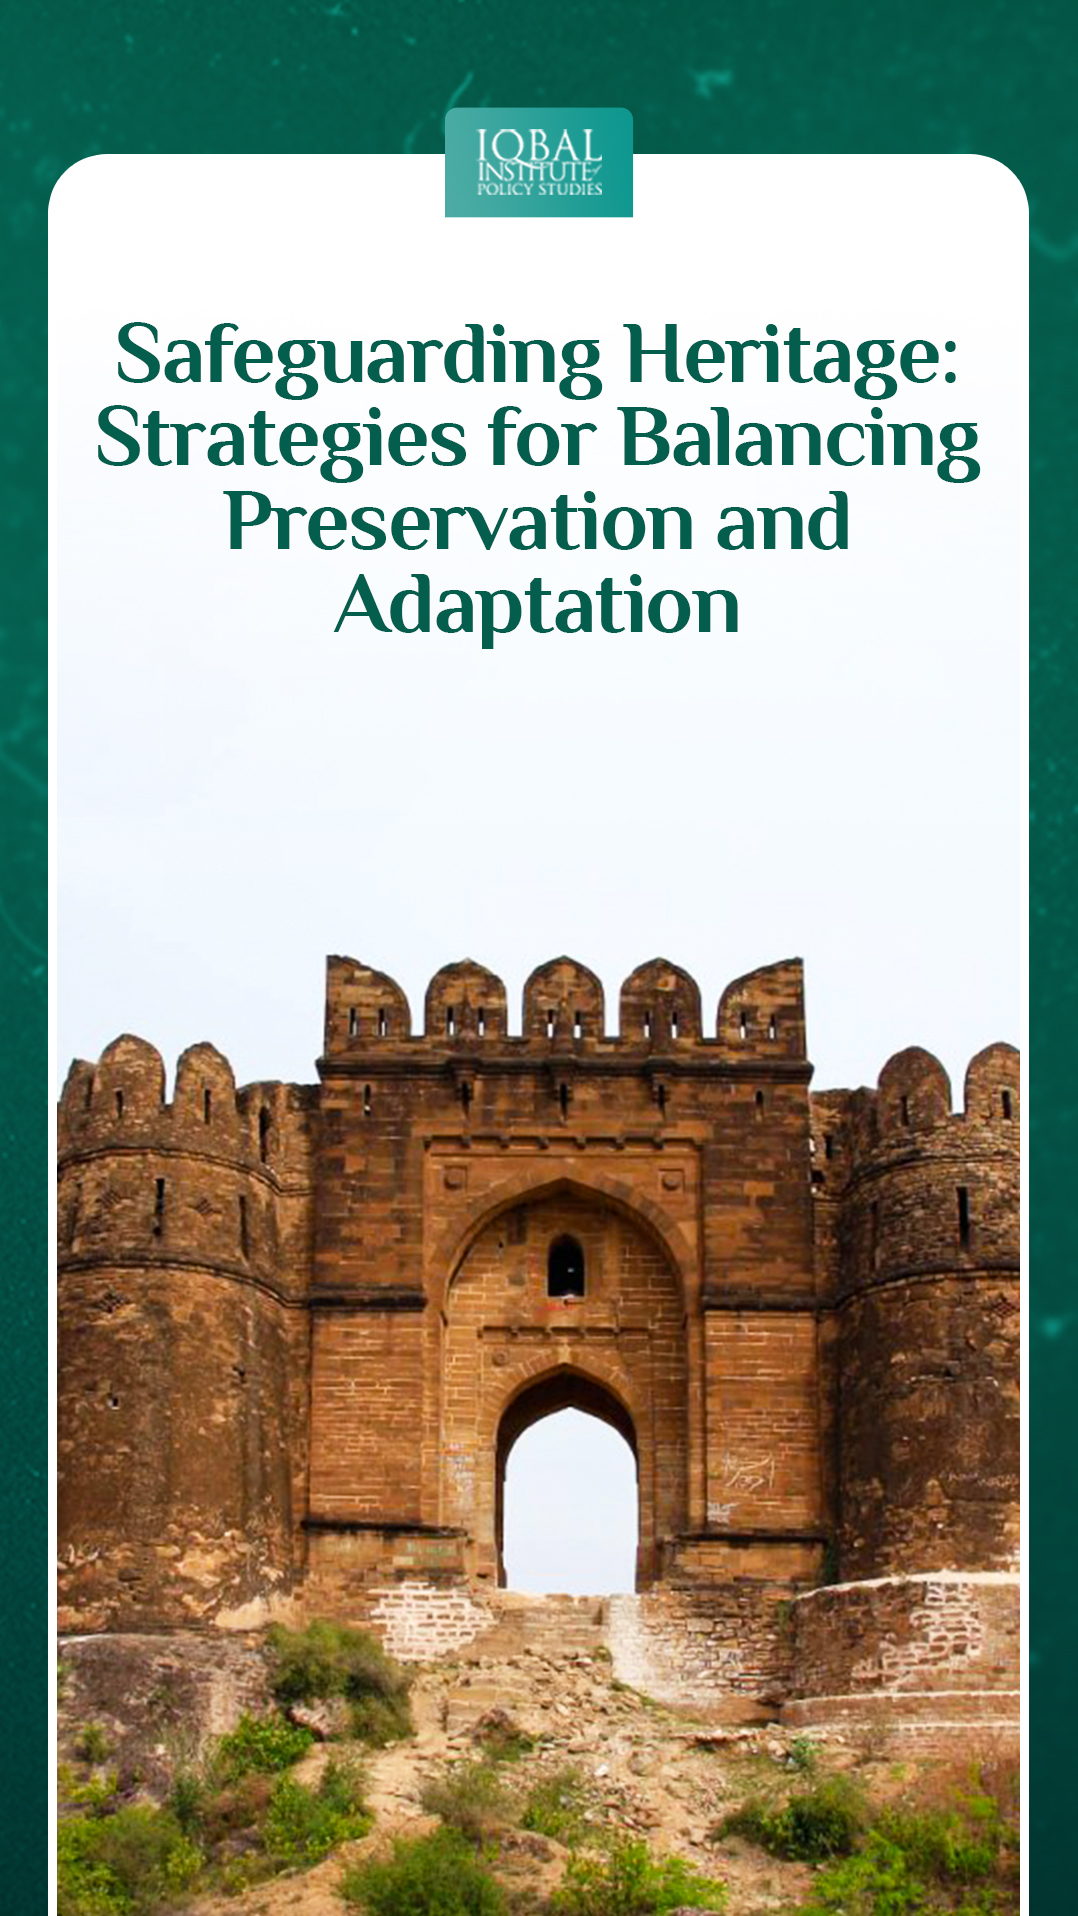 Safeguarding Heritage: Strategies for Balancing Preservation and Adaptation